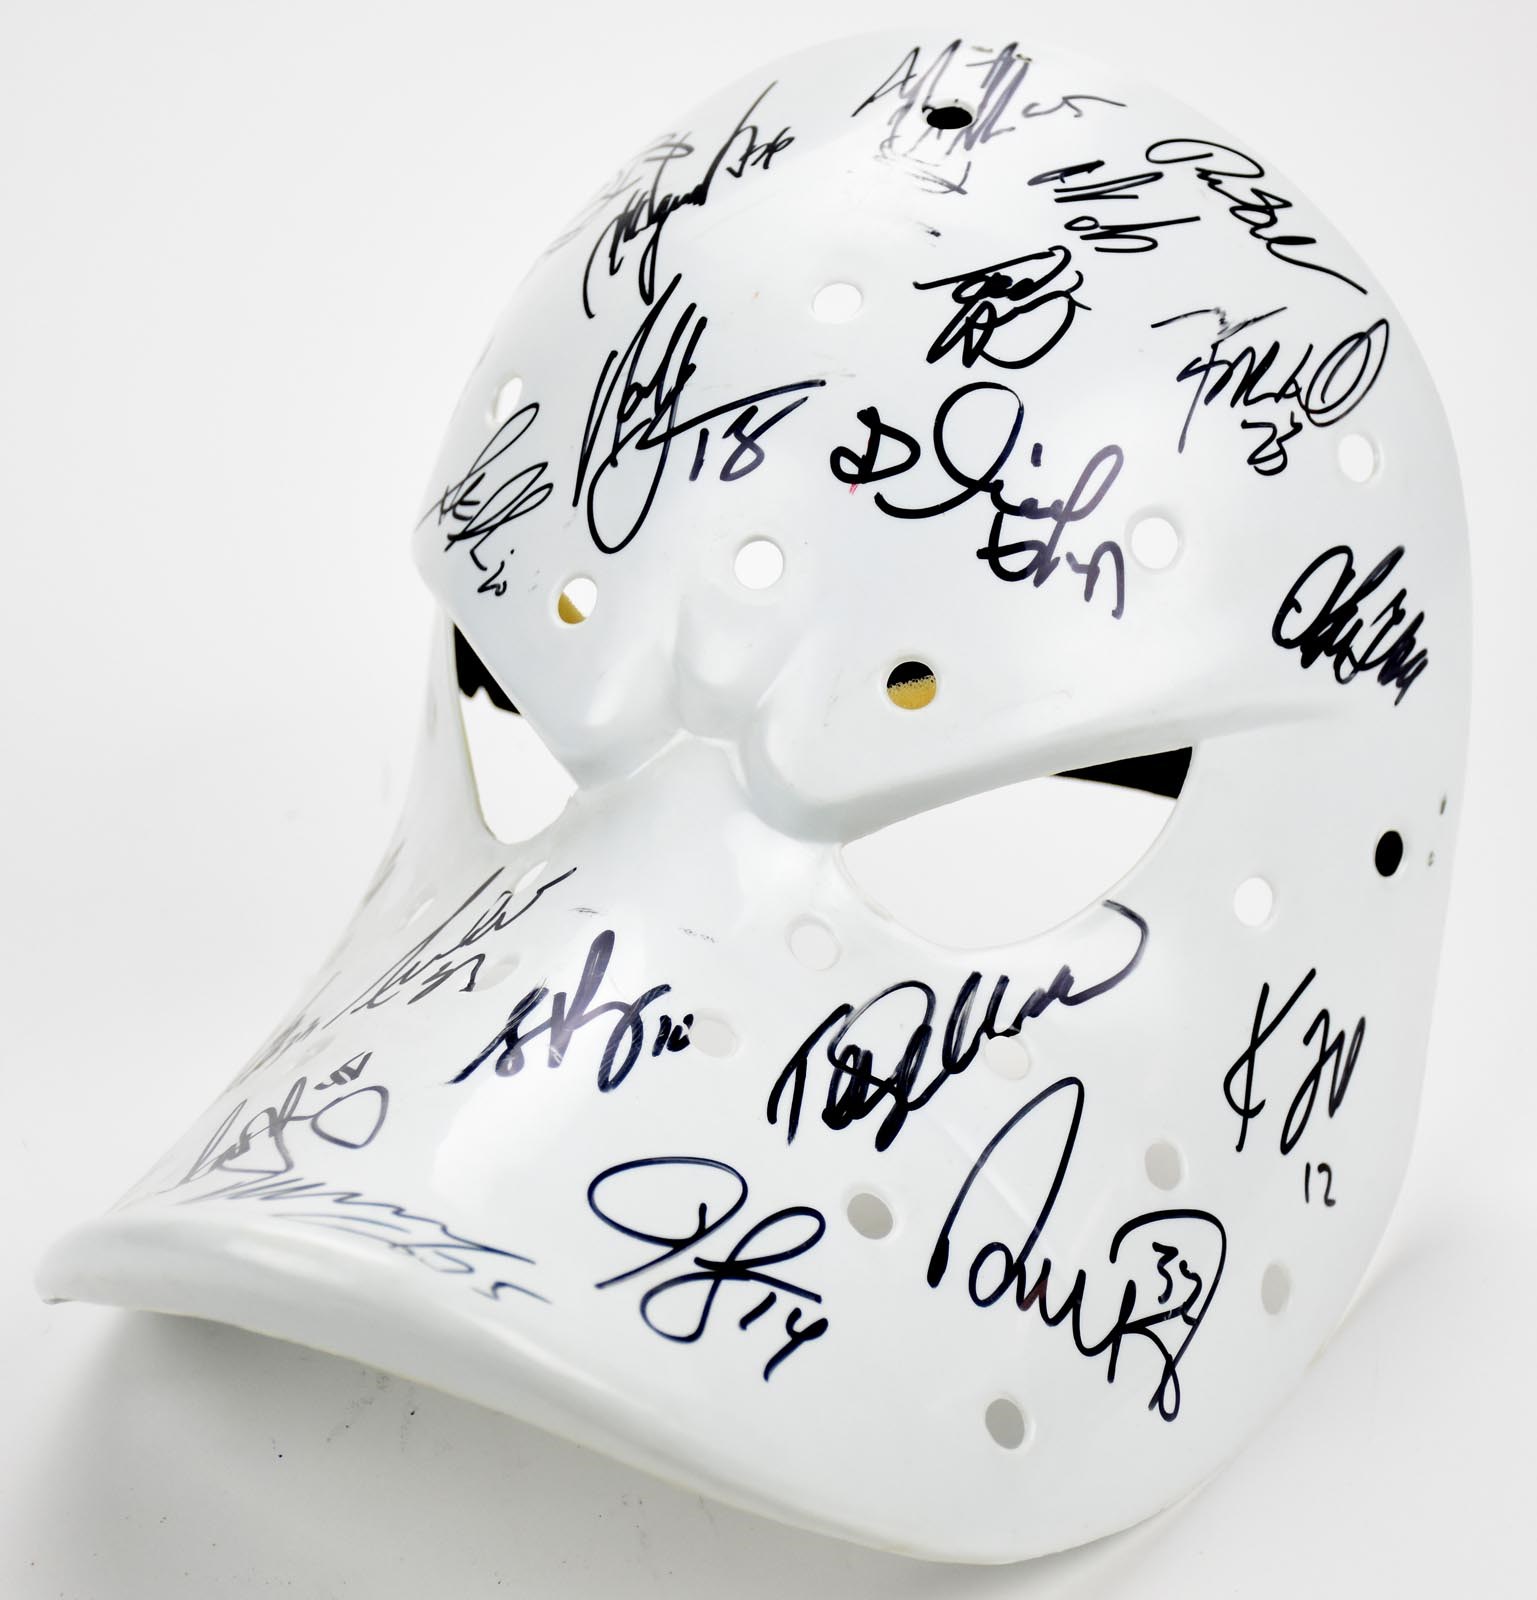 1997-98 Mighty Ducks Team Signed Mask